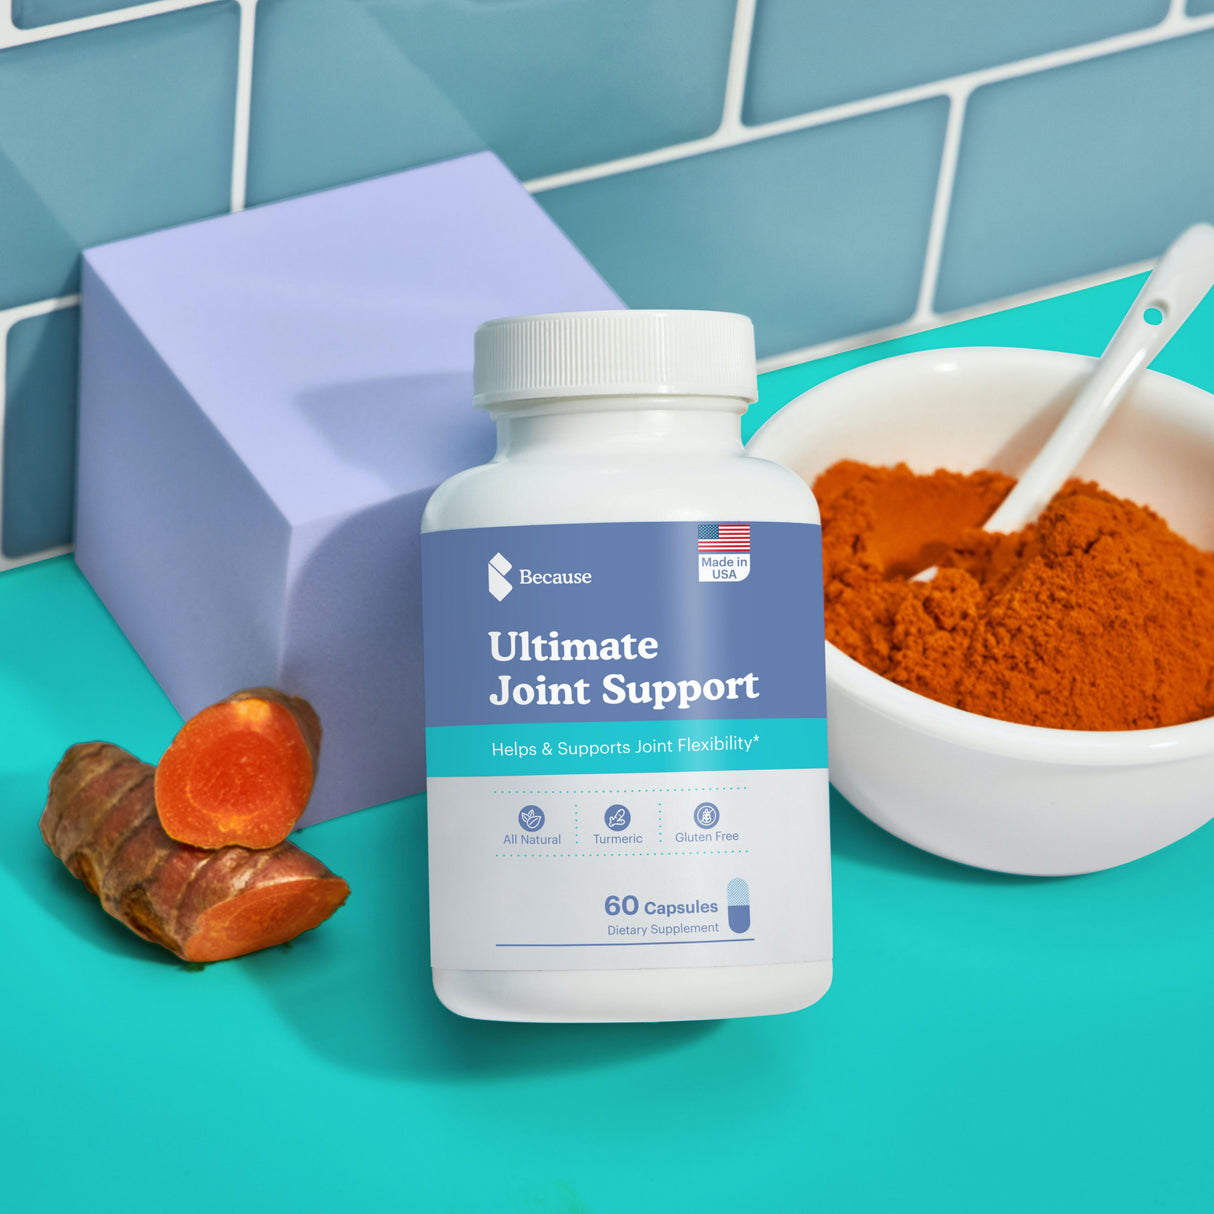 Ultimate joint support vitamin bottle sitting next to fresh and crushed turmeric